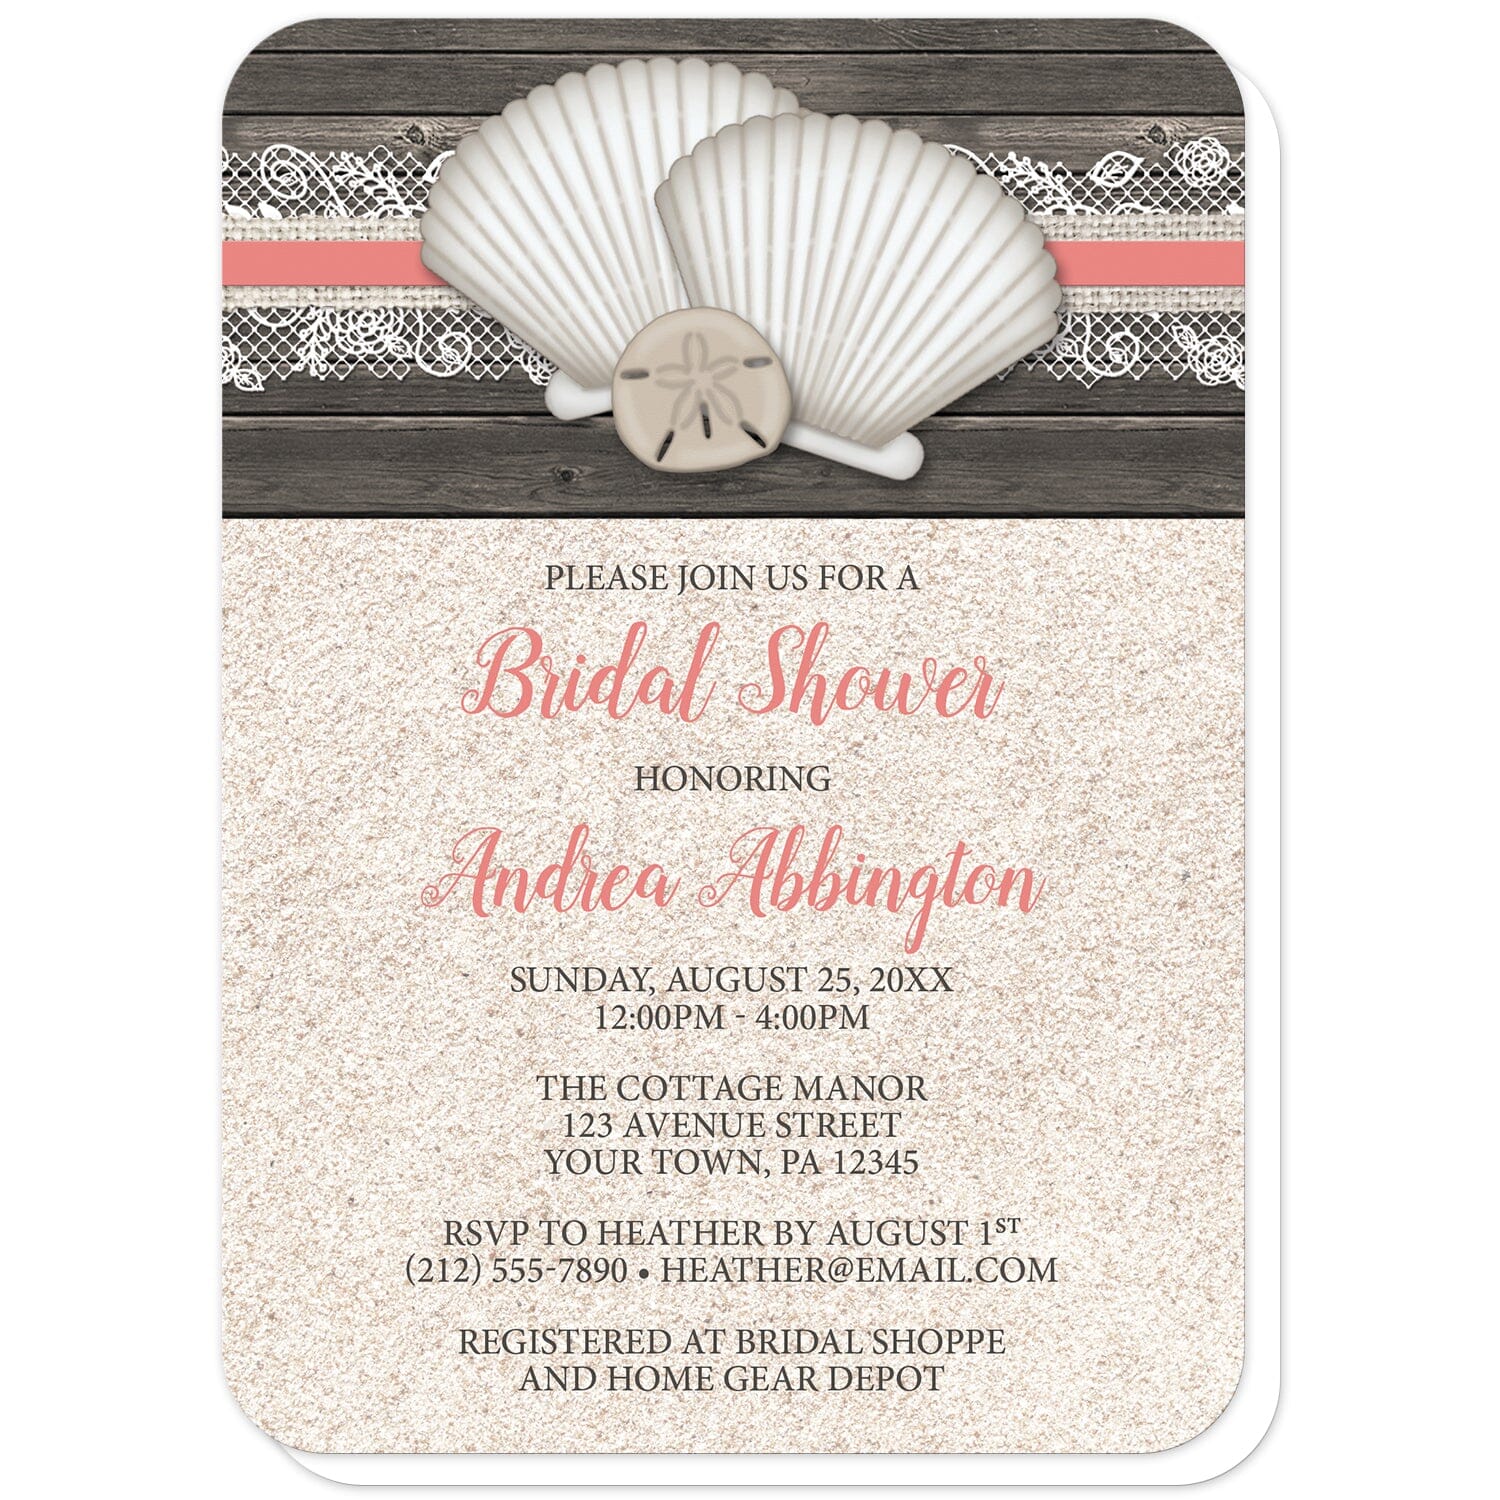 Seashell Lace Wood and Sand Coral Beach Bridal Shower Invitations (with rounded corners) at Artistically Invited. Rustic seashell lace wood and sand coral beach bridal shower invitations with two seashells and a sand dollar on a coral, burlap and lace ribbon over a dark brown wood pattern along the top. Your personalized bridal shower celebration details are custom printed in dark brown and coral over a beige sand background design below the seashells.